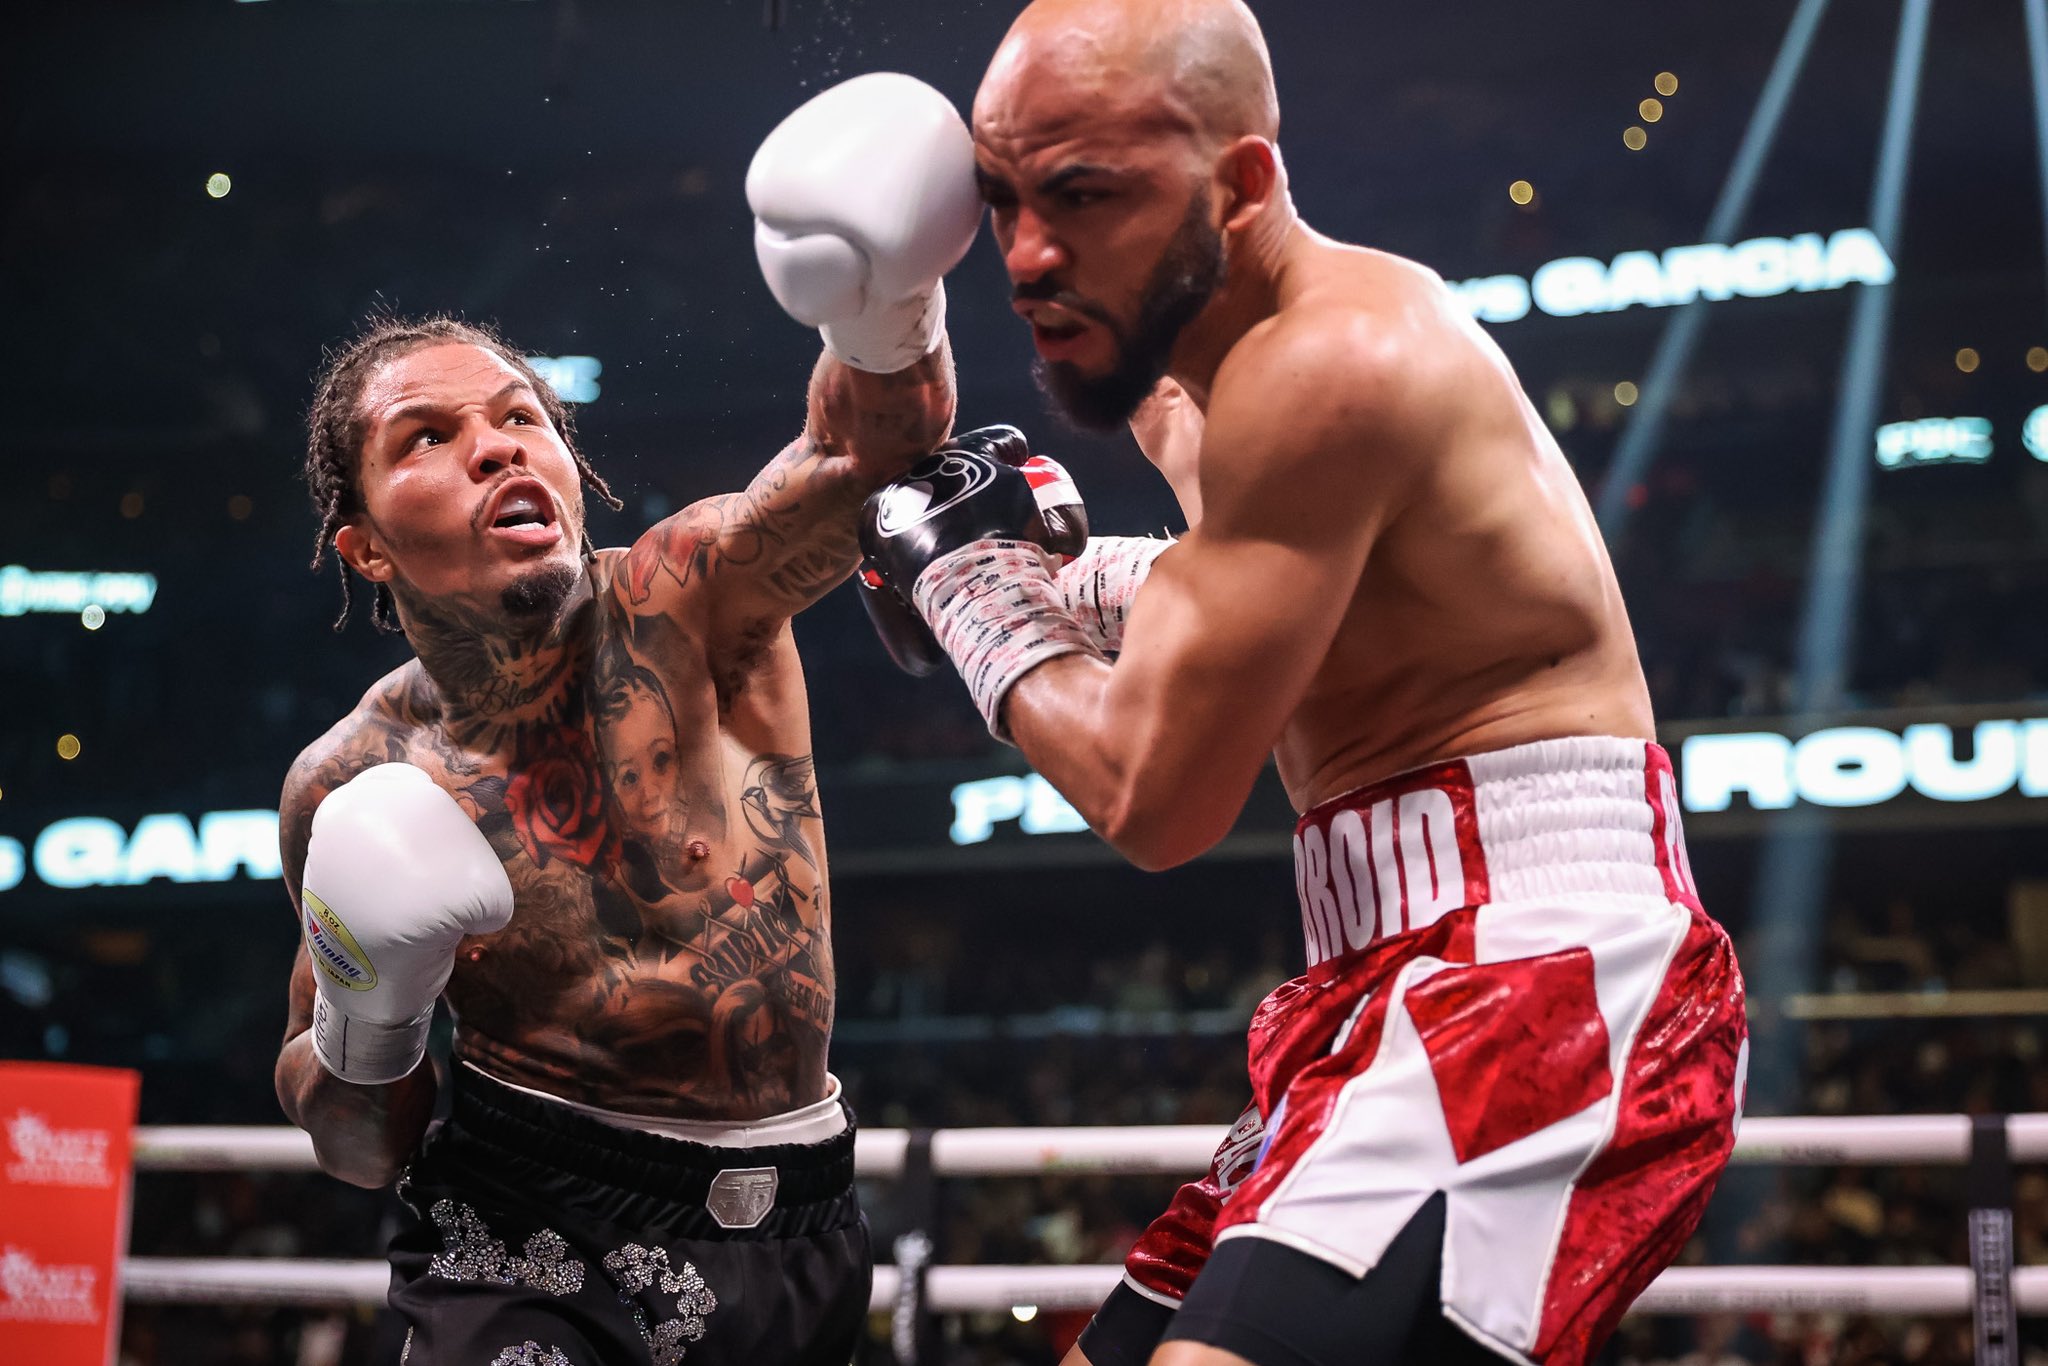 Gervonta Davis got the job done against Hector Luis Garcia, setting up a fight with Ryan Garcia